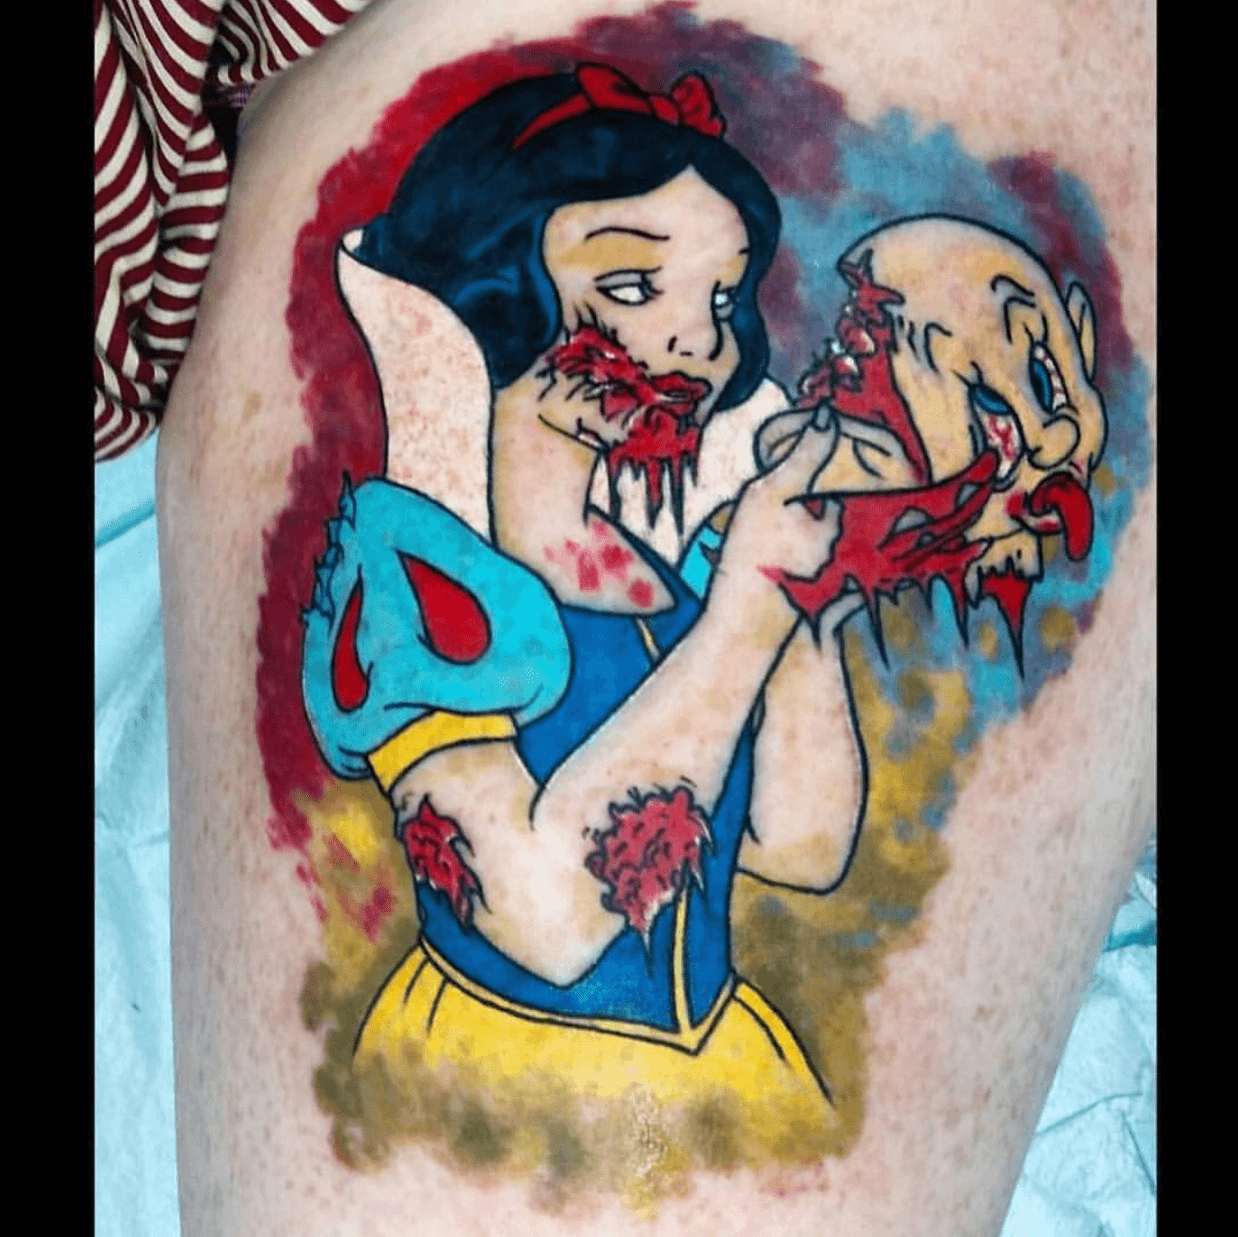 Tattoo tagged with br cinderella disney snow white beauty and the  beast quote splatter  inkedappcom